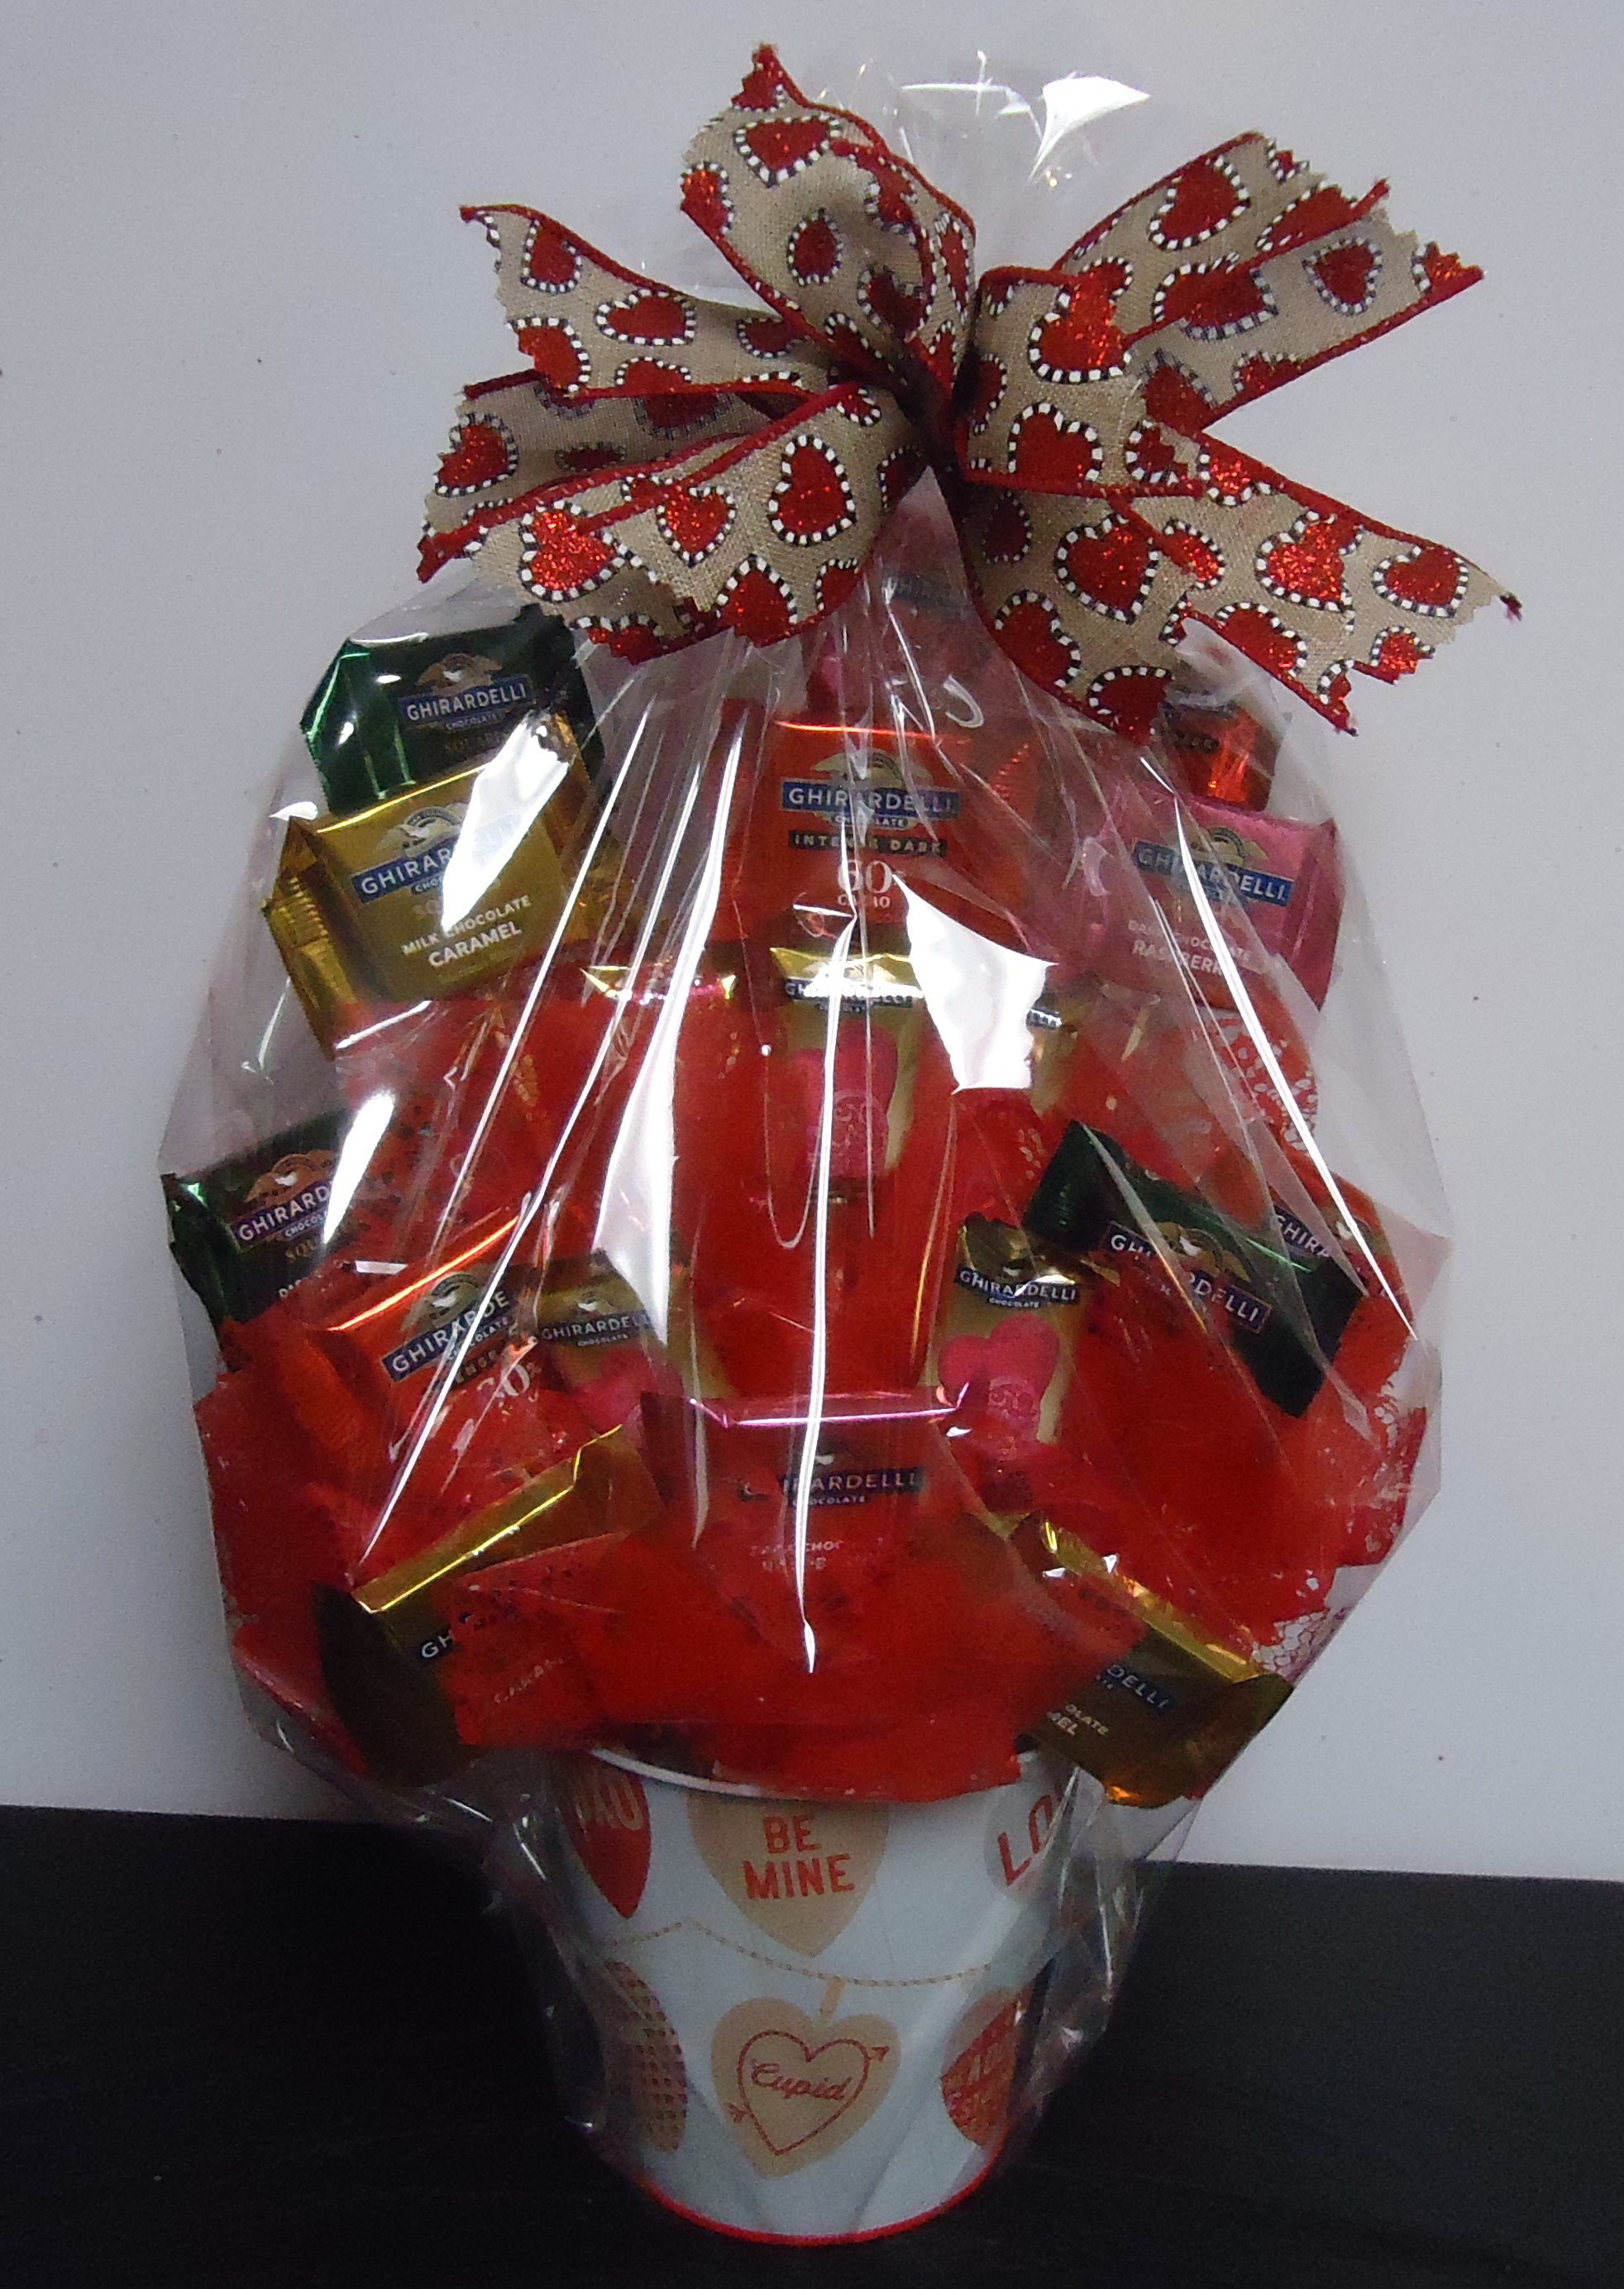 (8) "Ghirardelli" Chocolate
Candy Bouquet
$40.00
(2 Left)